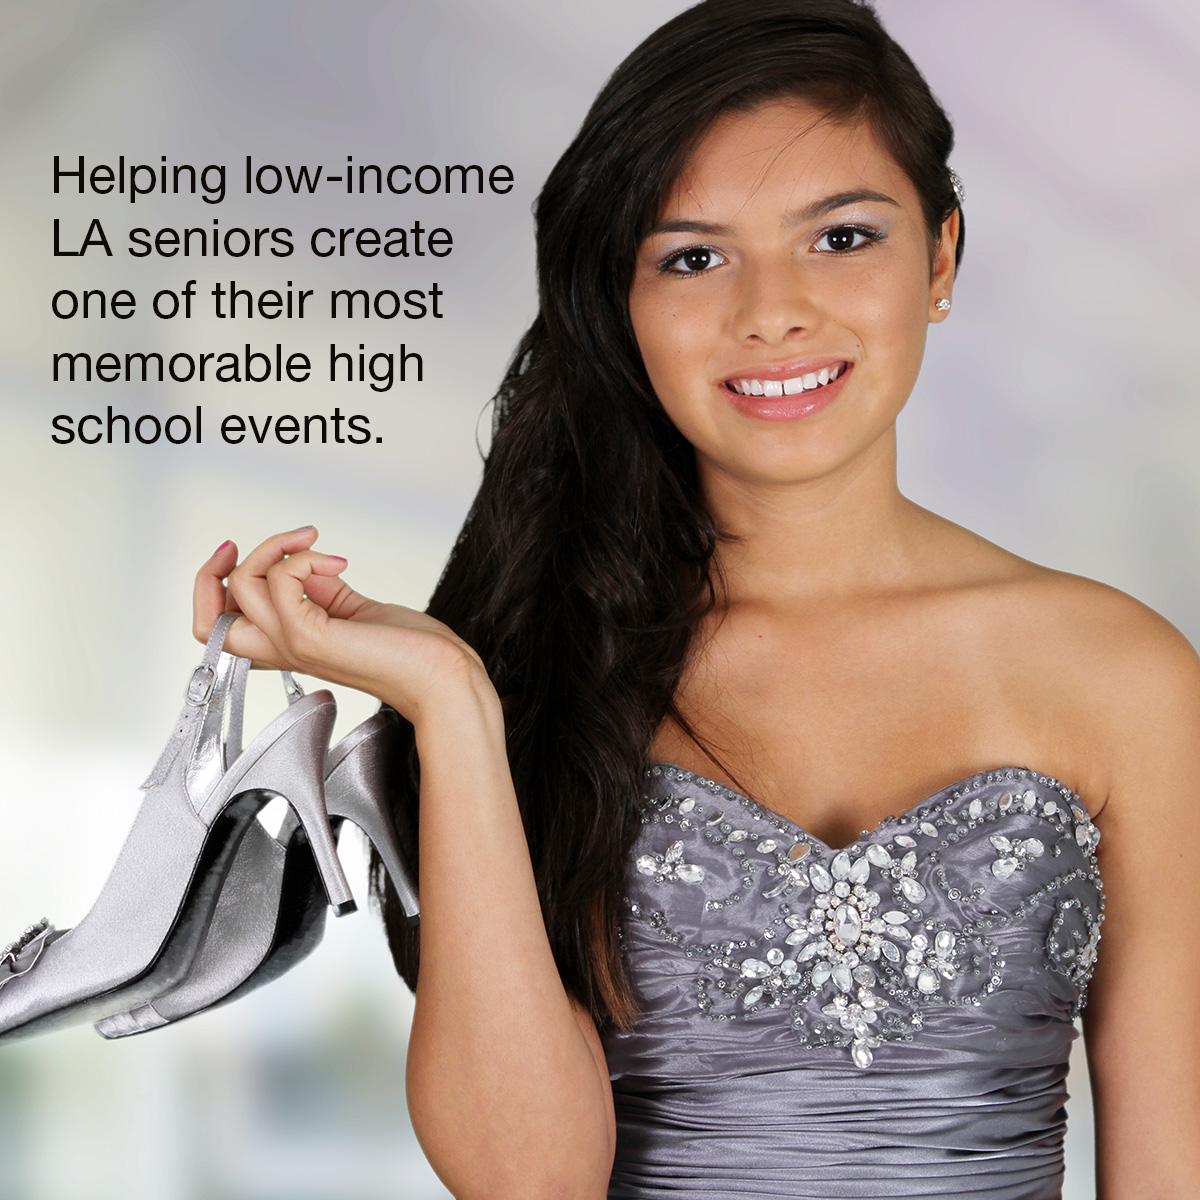 Prom Dreams provides scholarships to low-income young ladies wishing to attend their prom